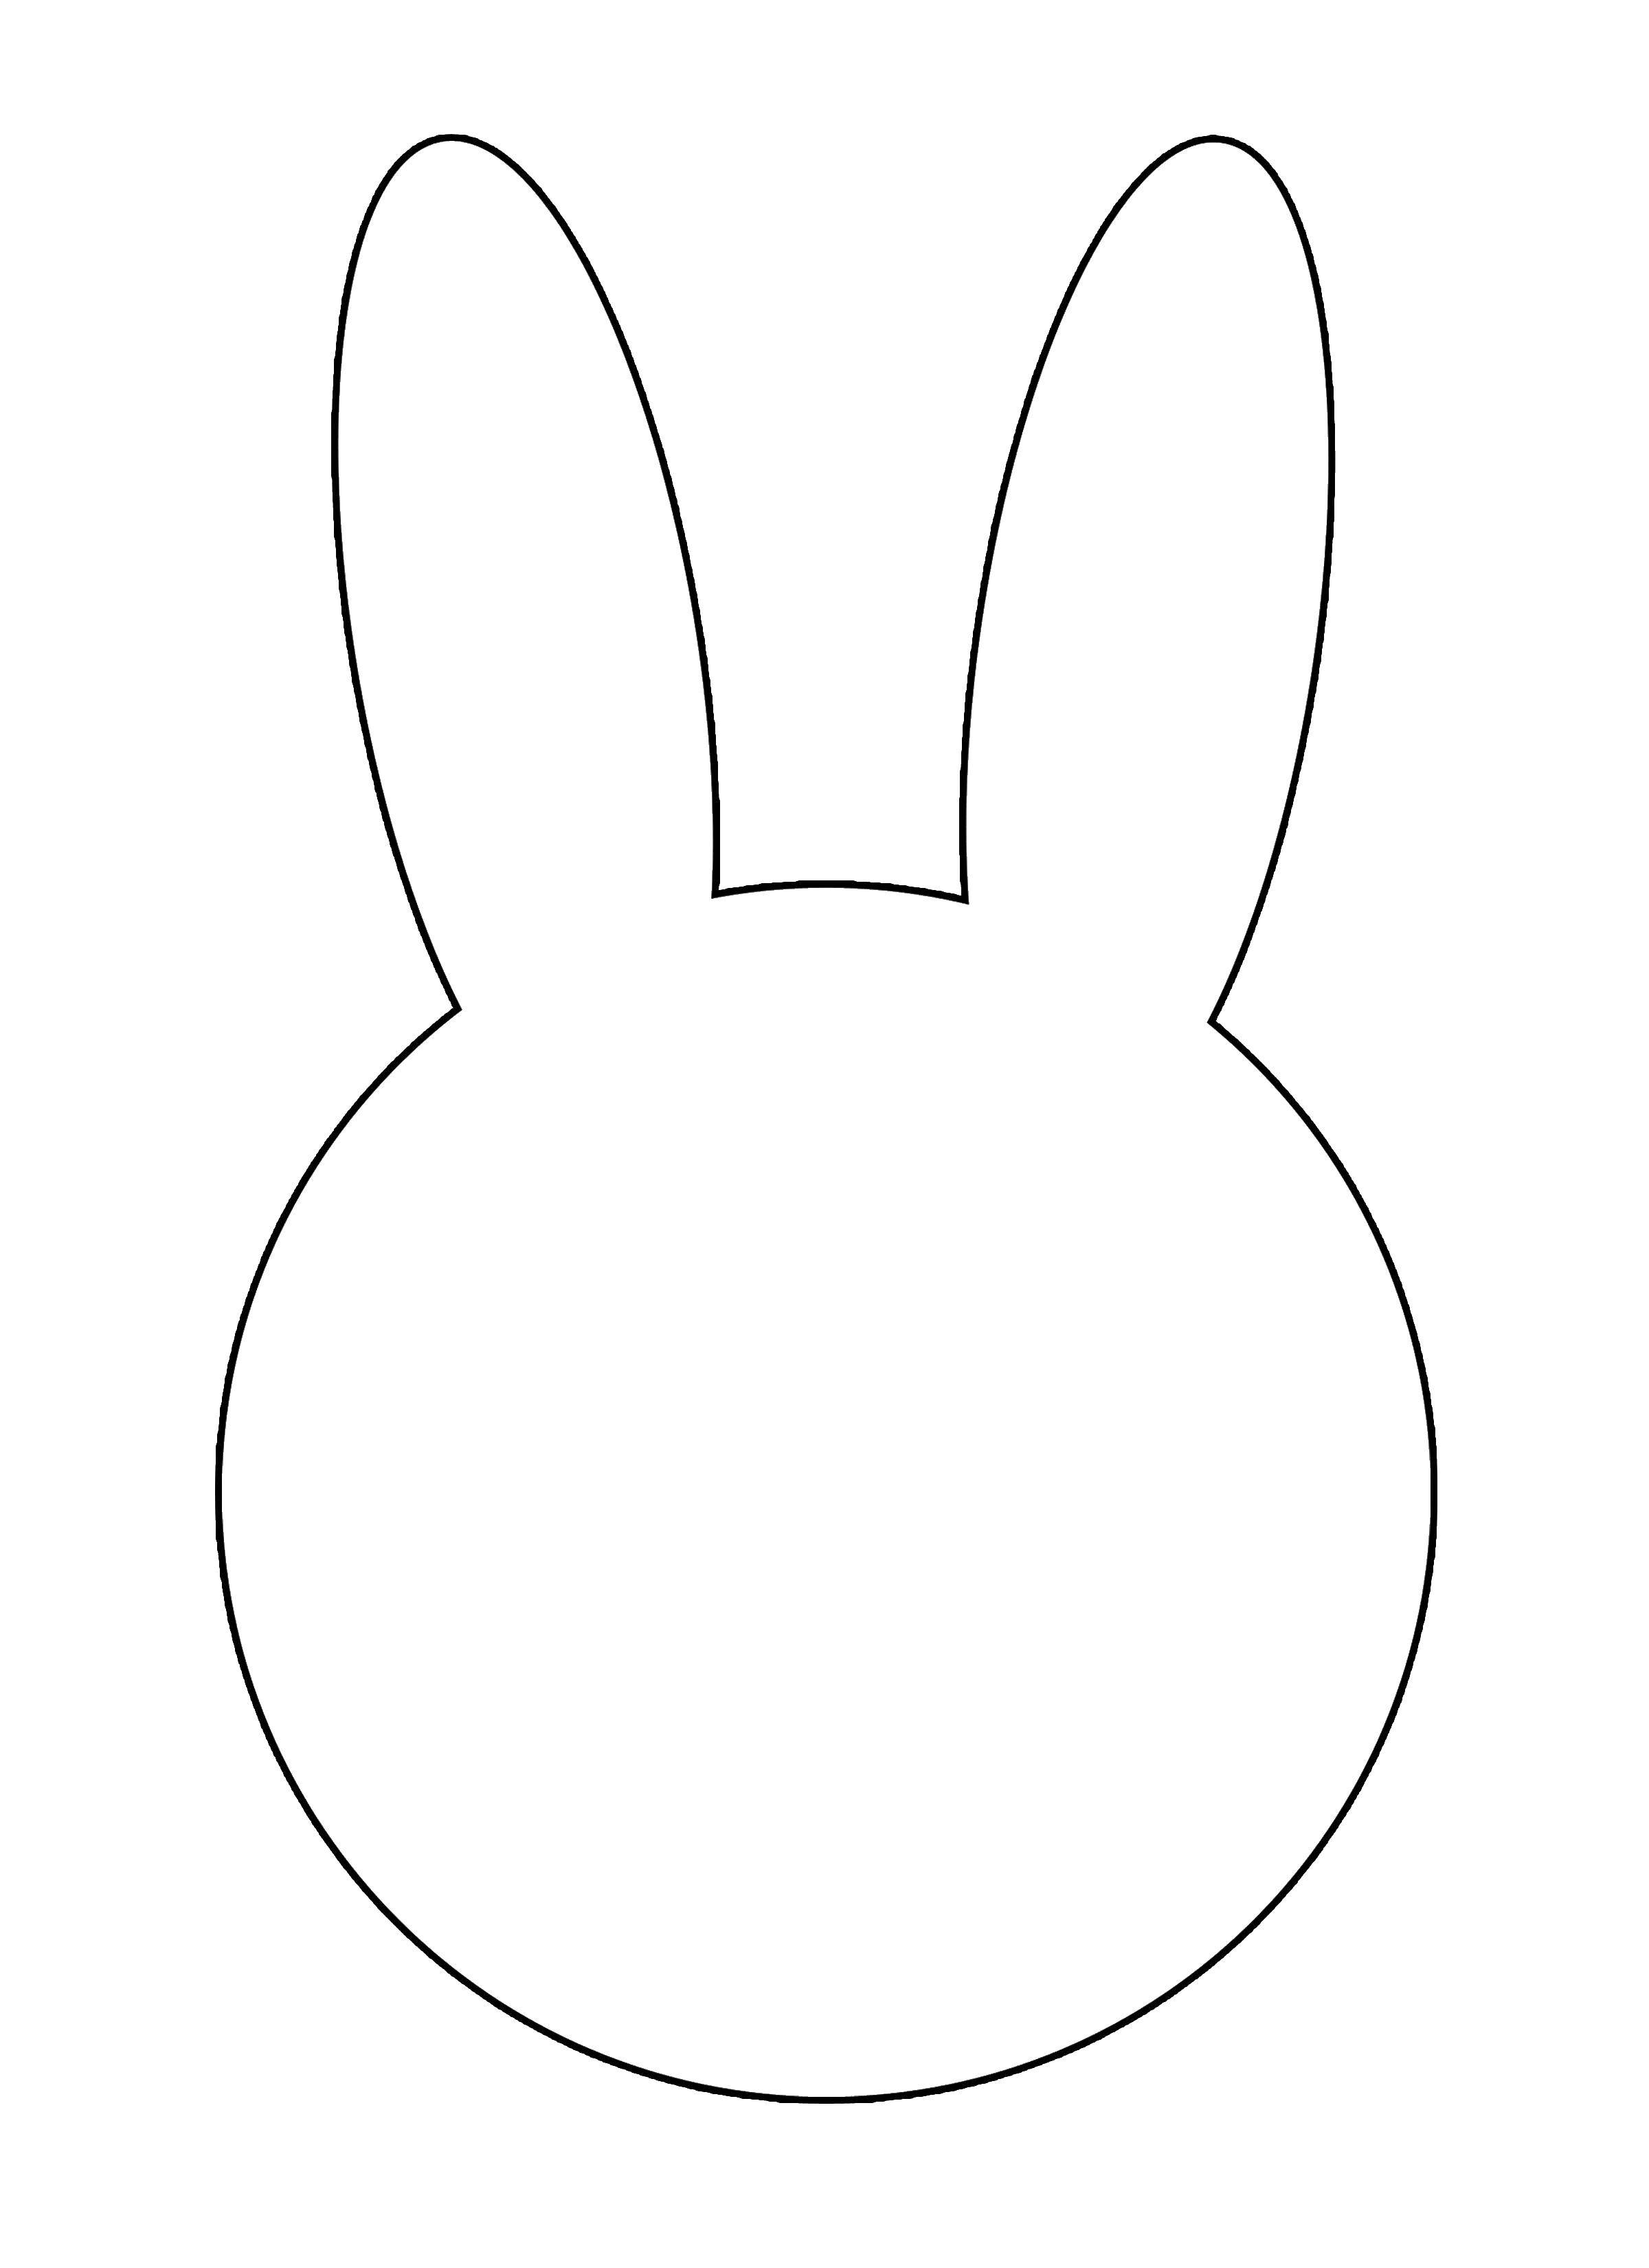 Coloring The contour of the head of a rabbit without a face. Category The contour of the hare to cut. Tags:  outline , rabbit, head, ears.